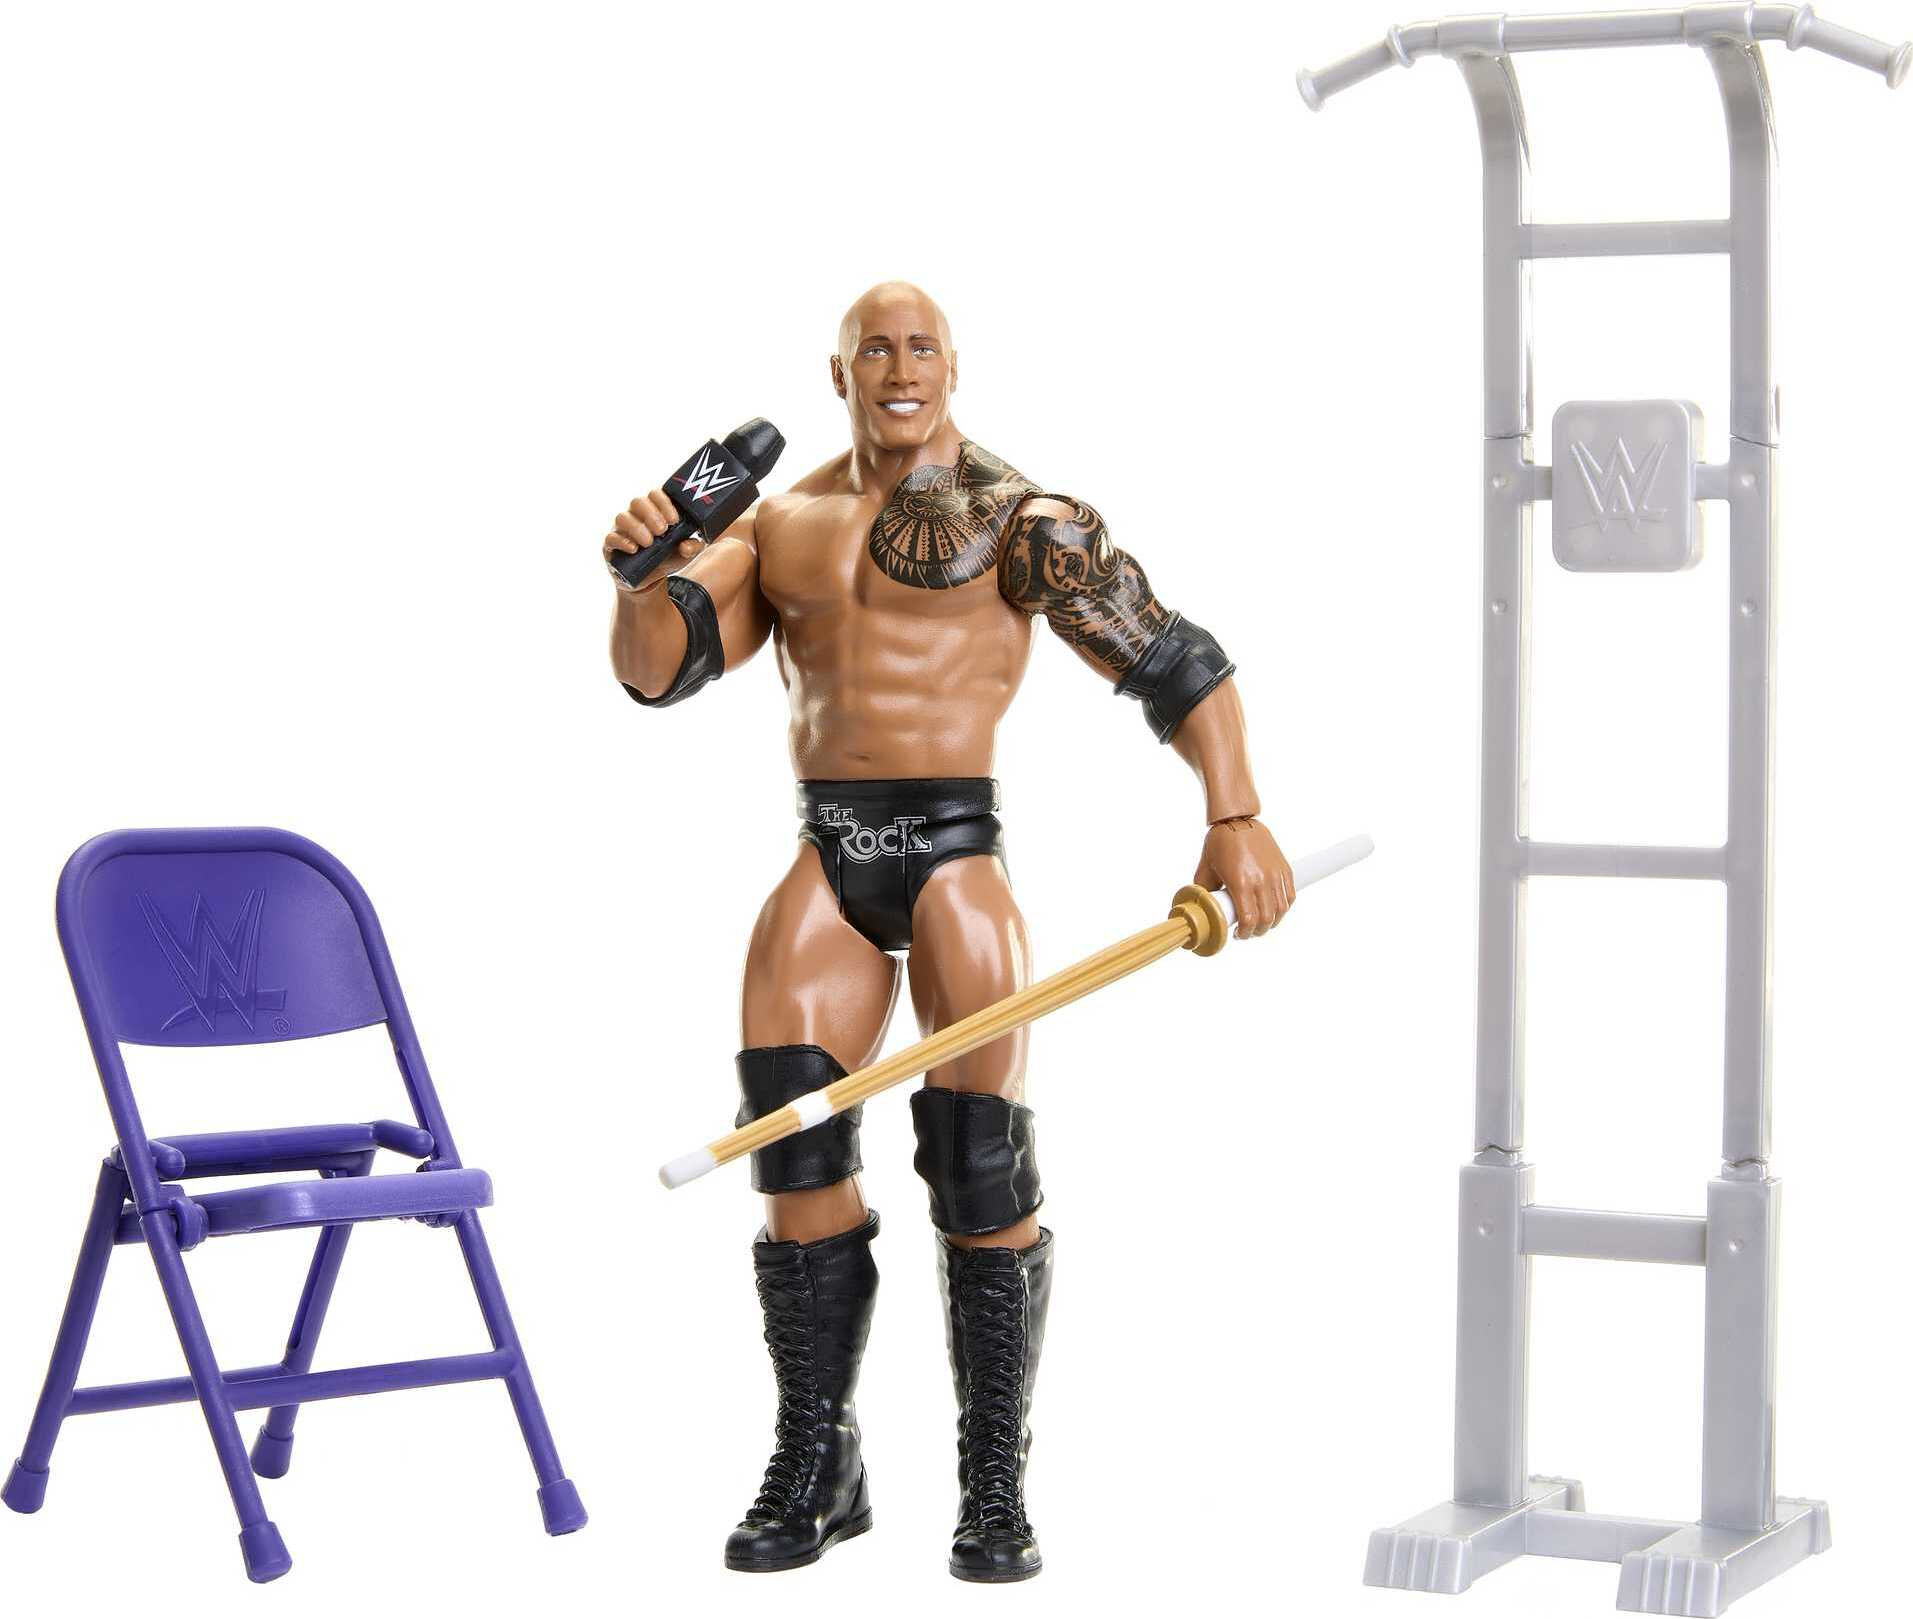 WWE Action Figure The Rock with Ringside Battle Accessories